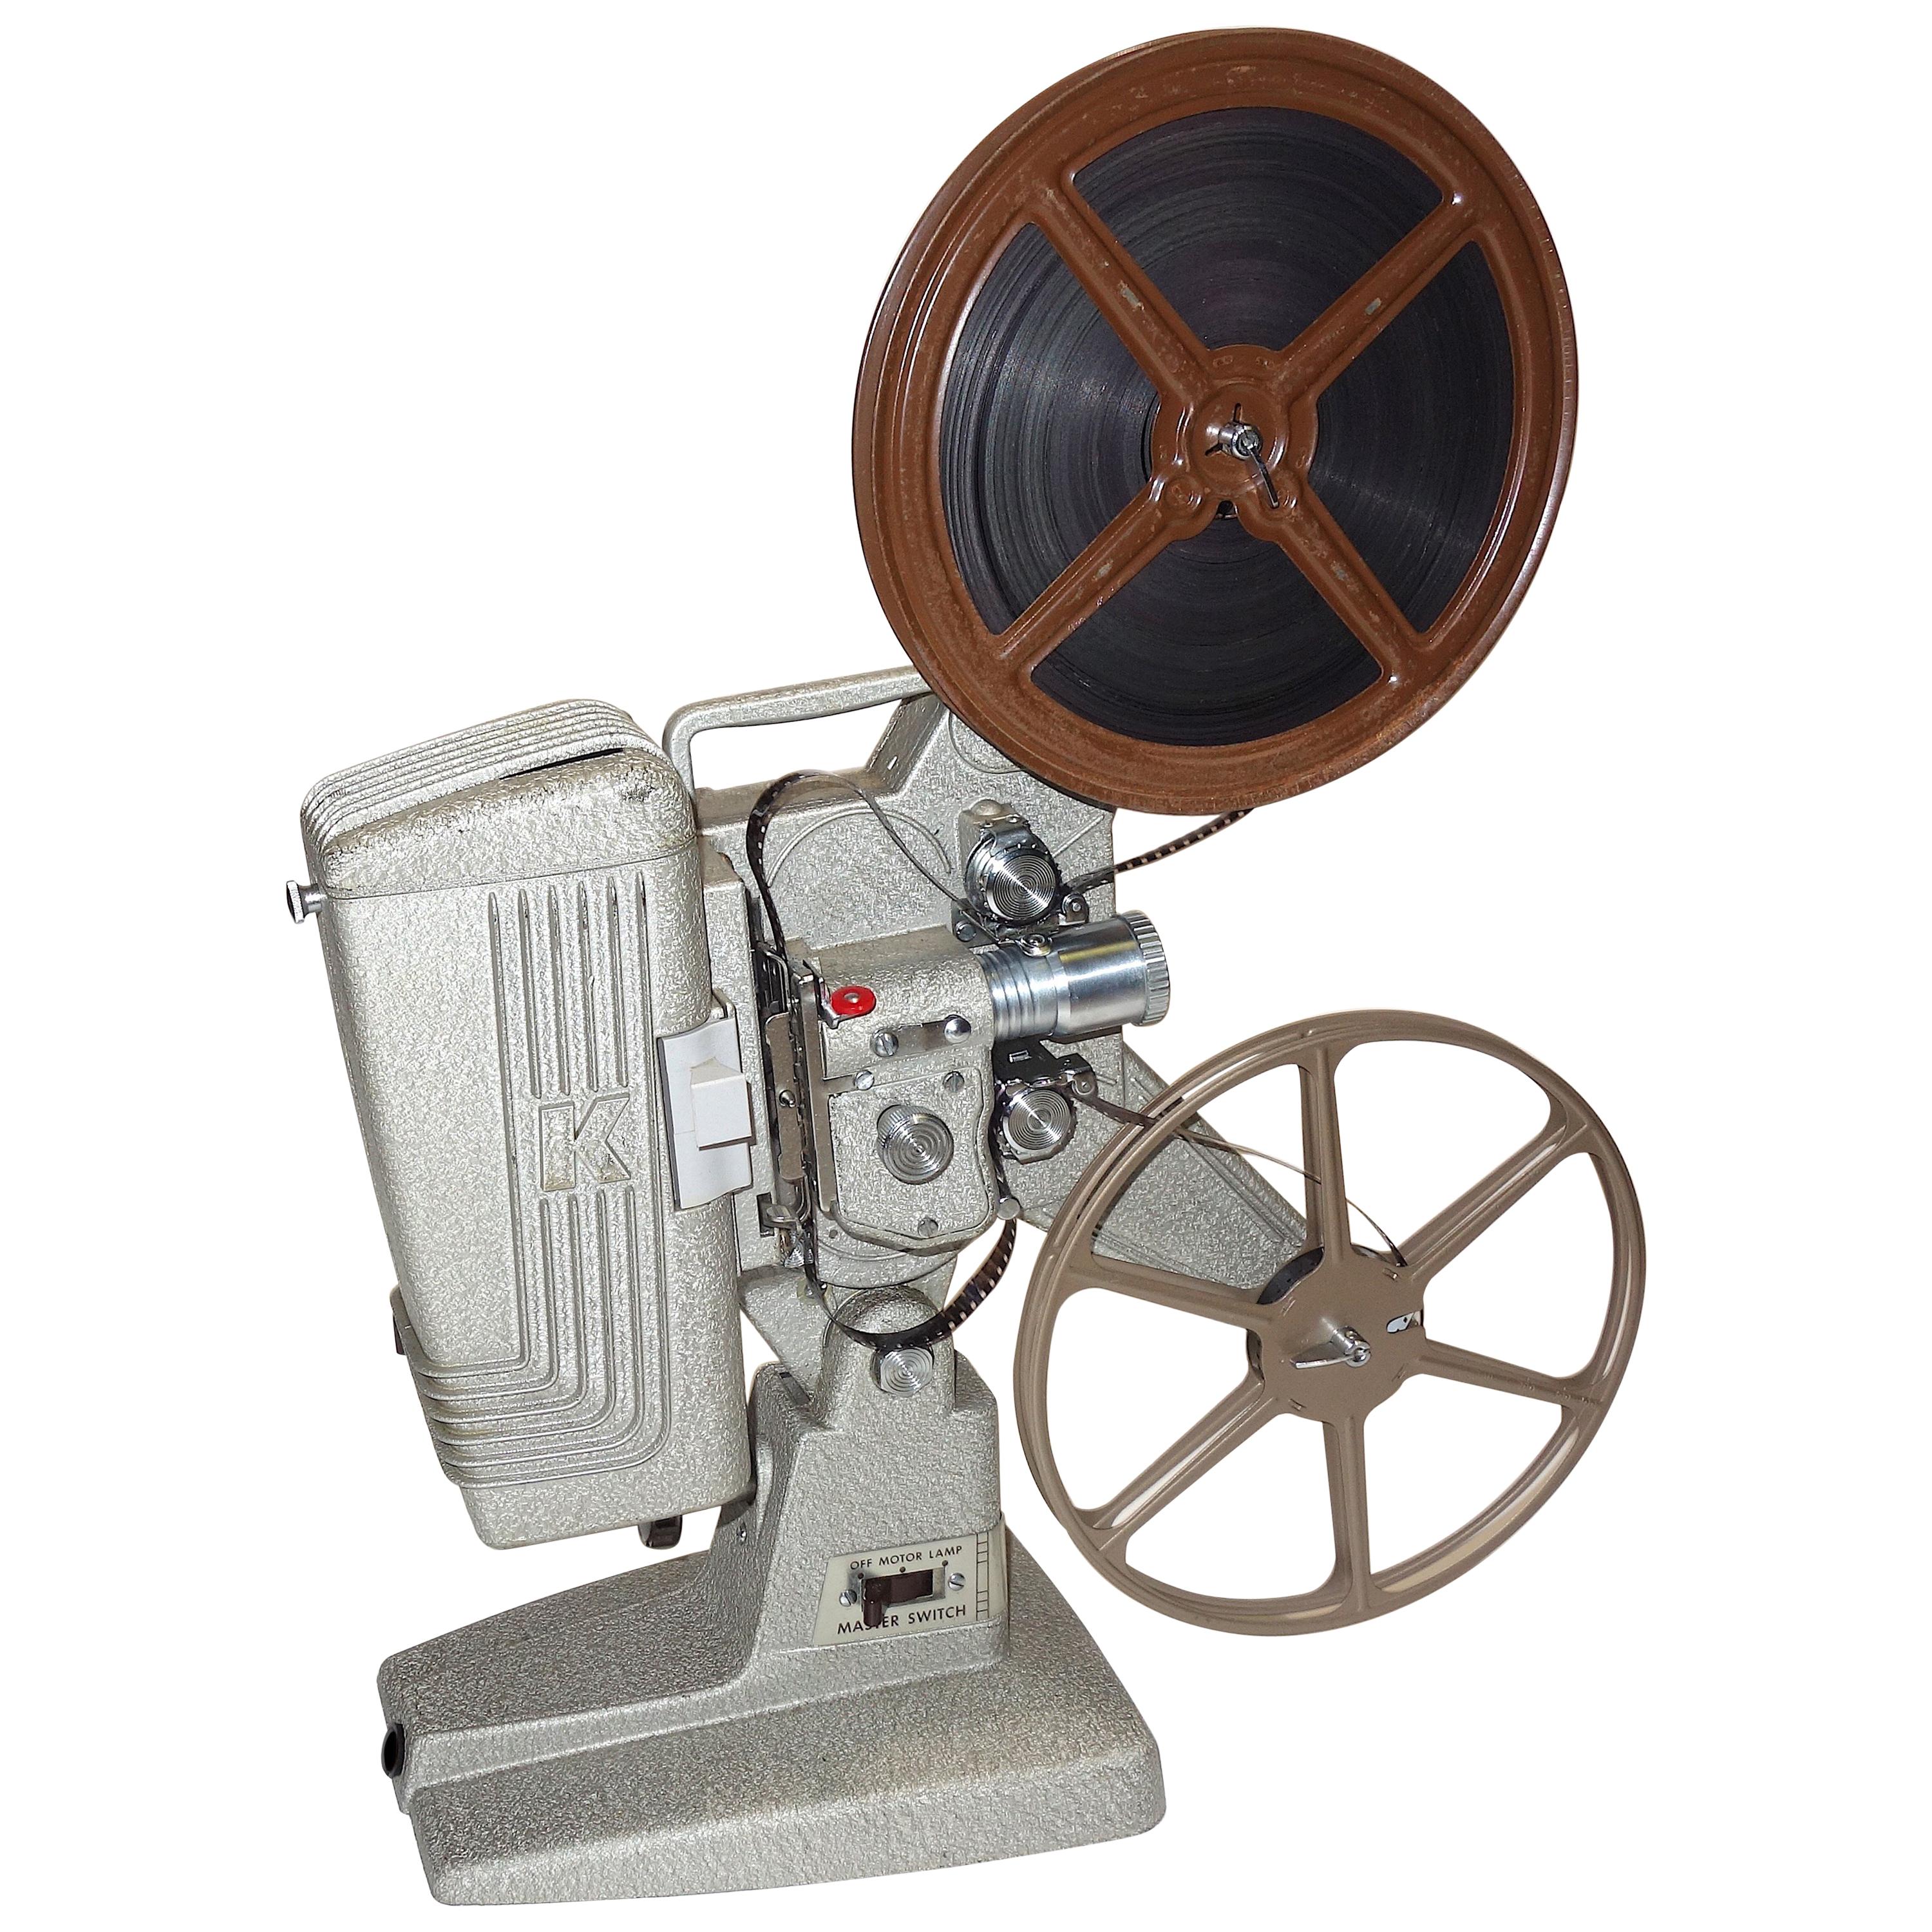 Keystone Vintage Movie Projector circa 1950s, Pristine, with Film and Reels, Wow For Sale